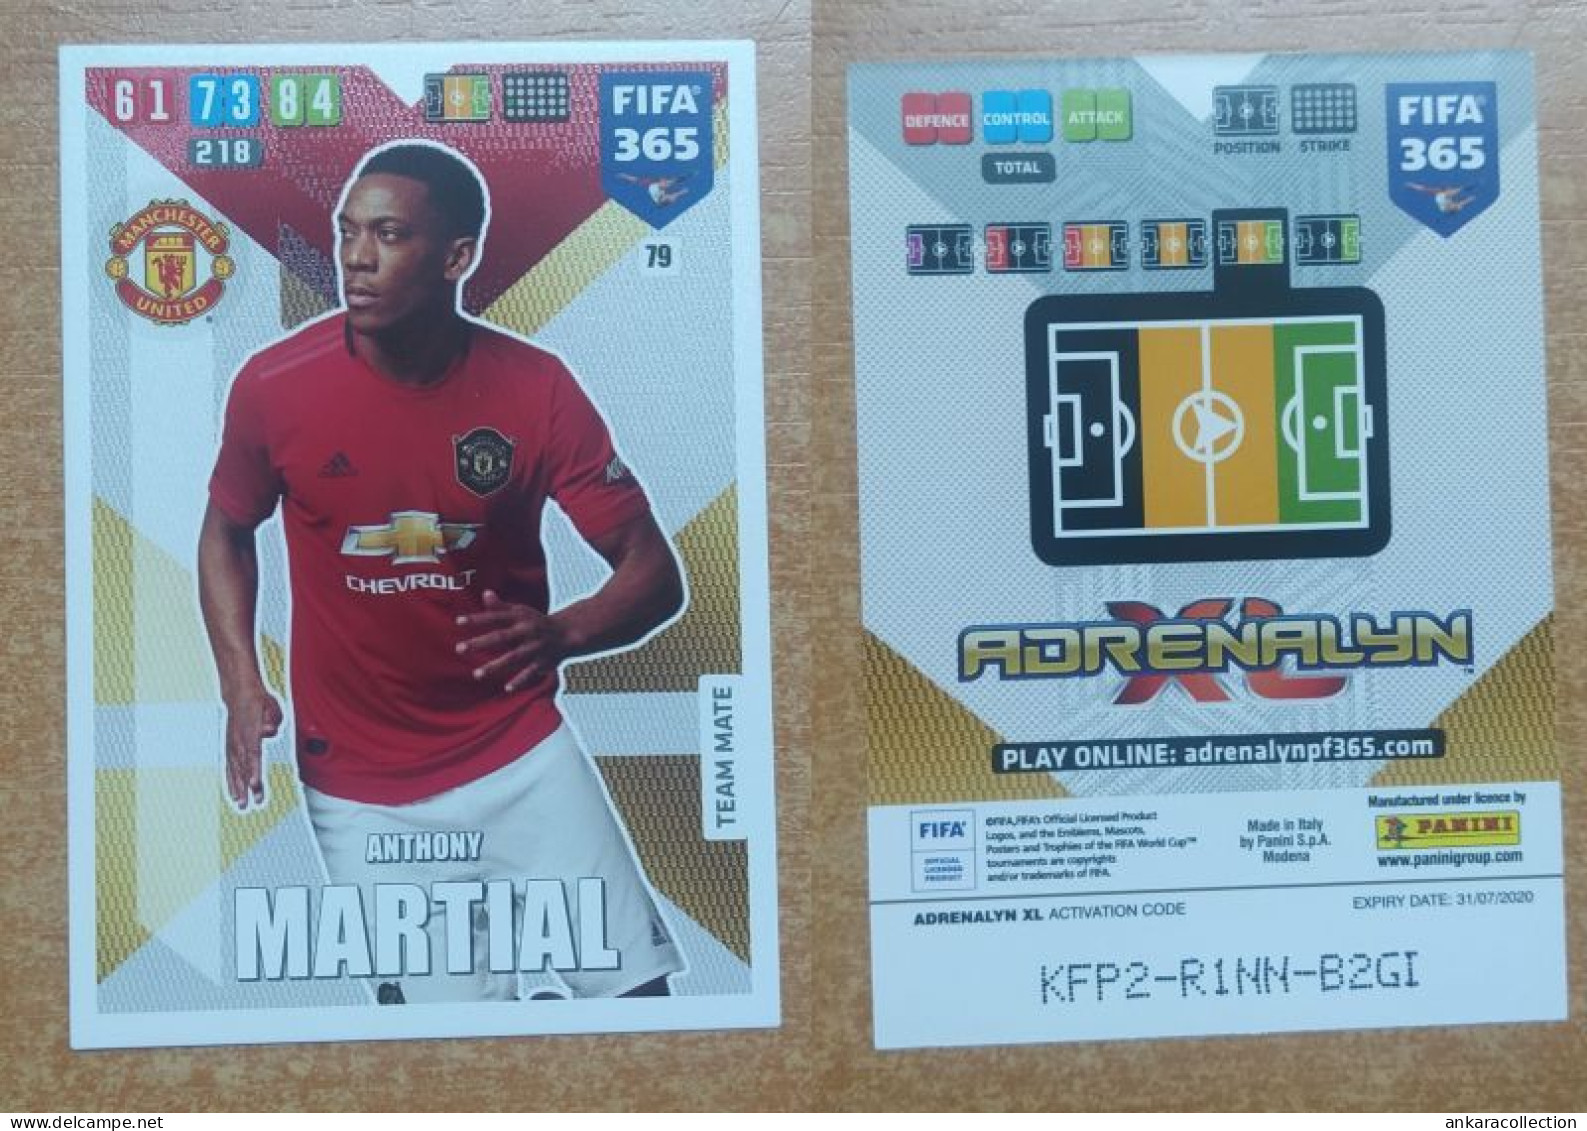 AC - 79 ANTHONY MARTIAL  MANCHESTER UNITED  PANINI FIFA 365 2020 ADRENALYN TRADING CARD - Trading-Karten